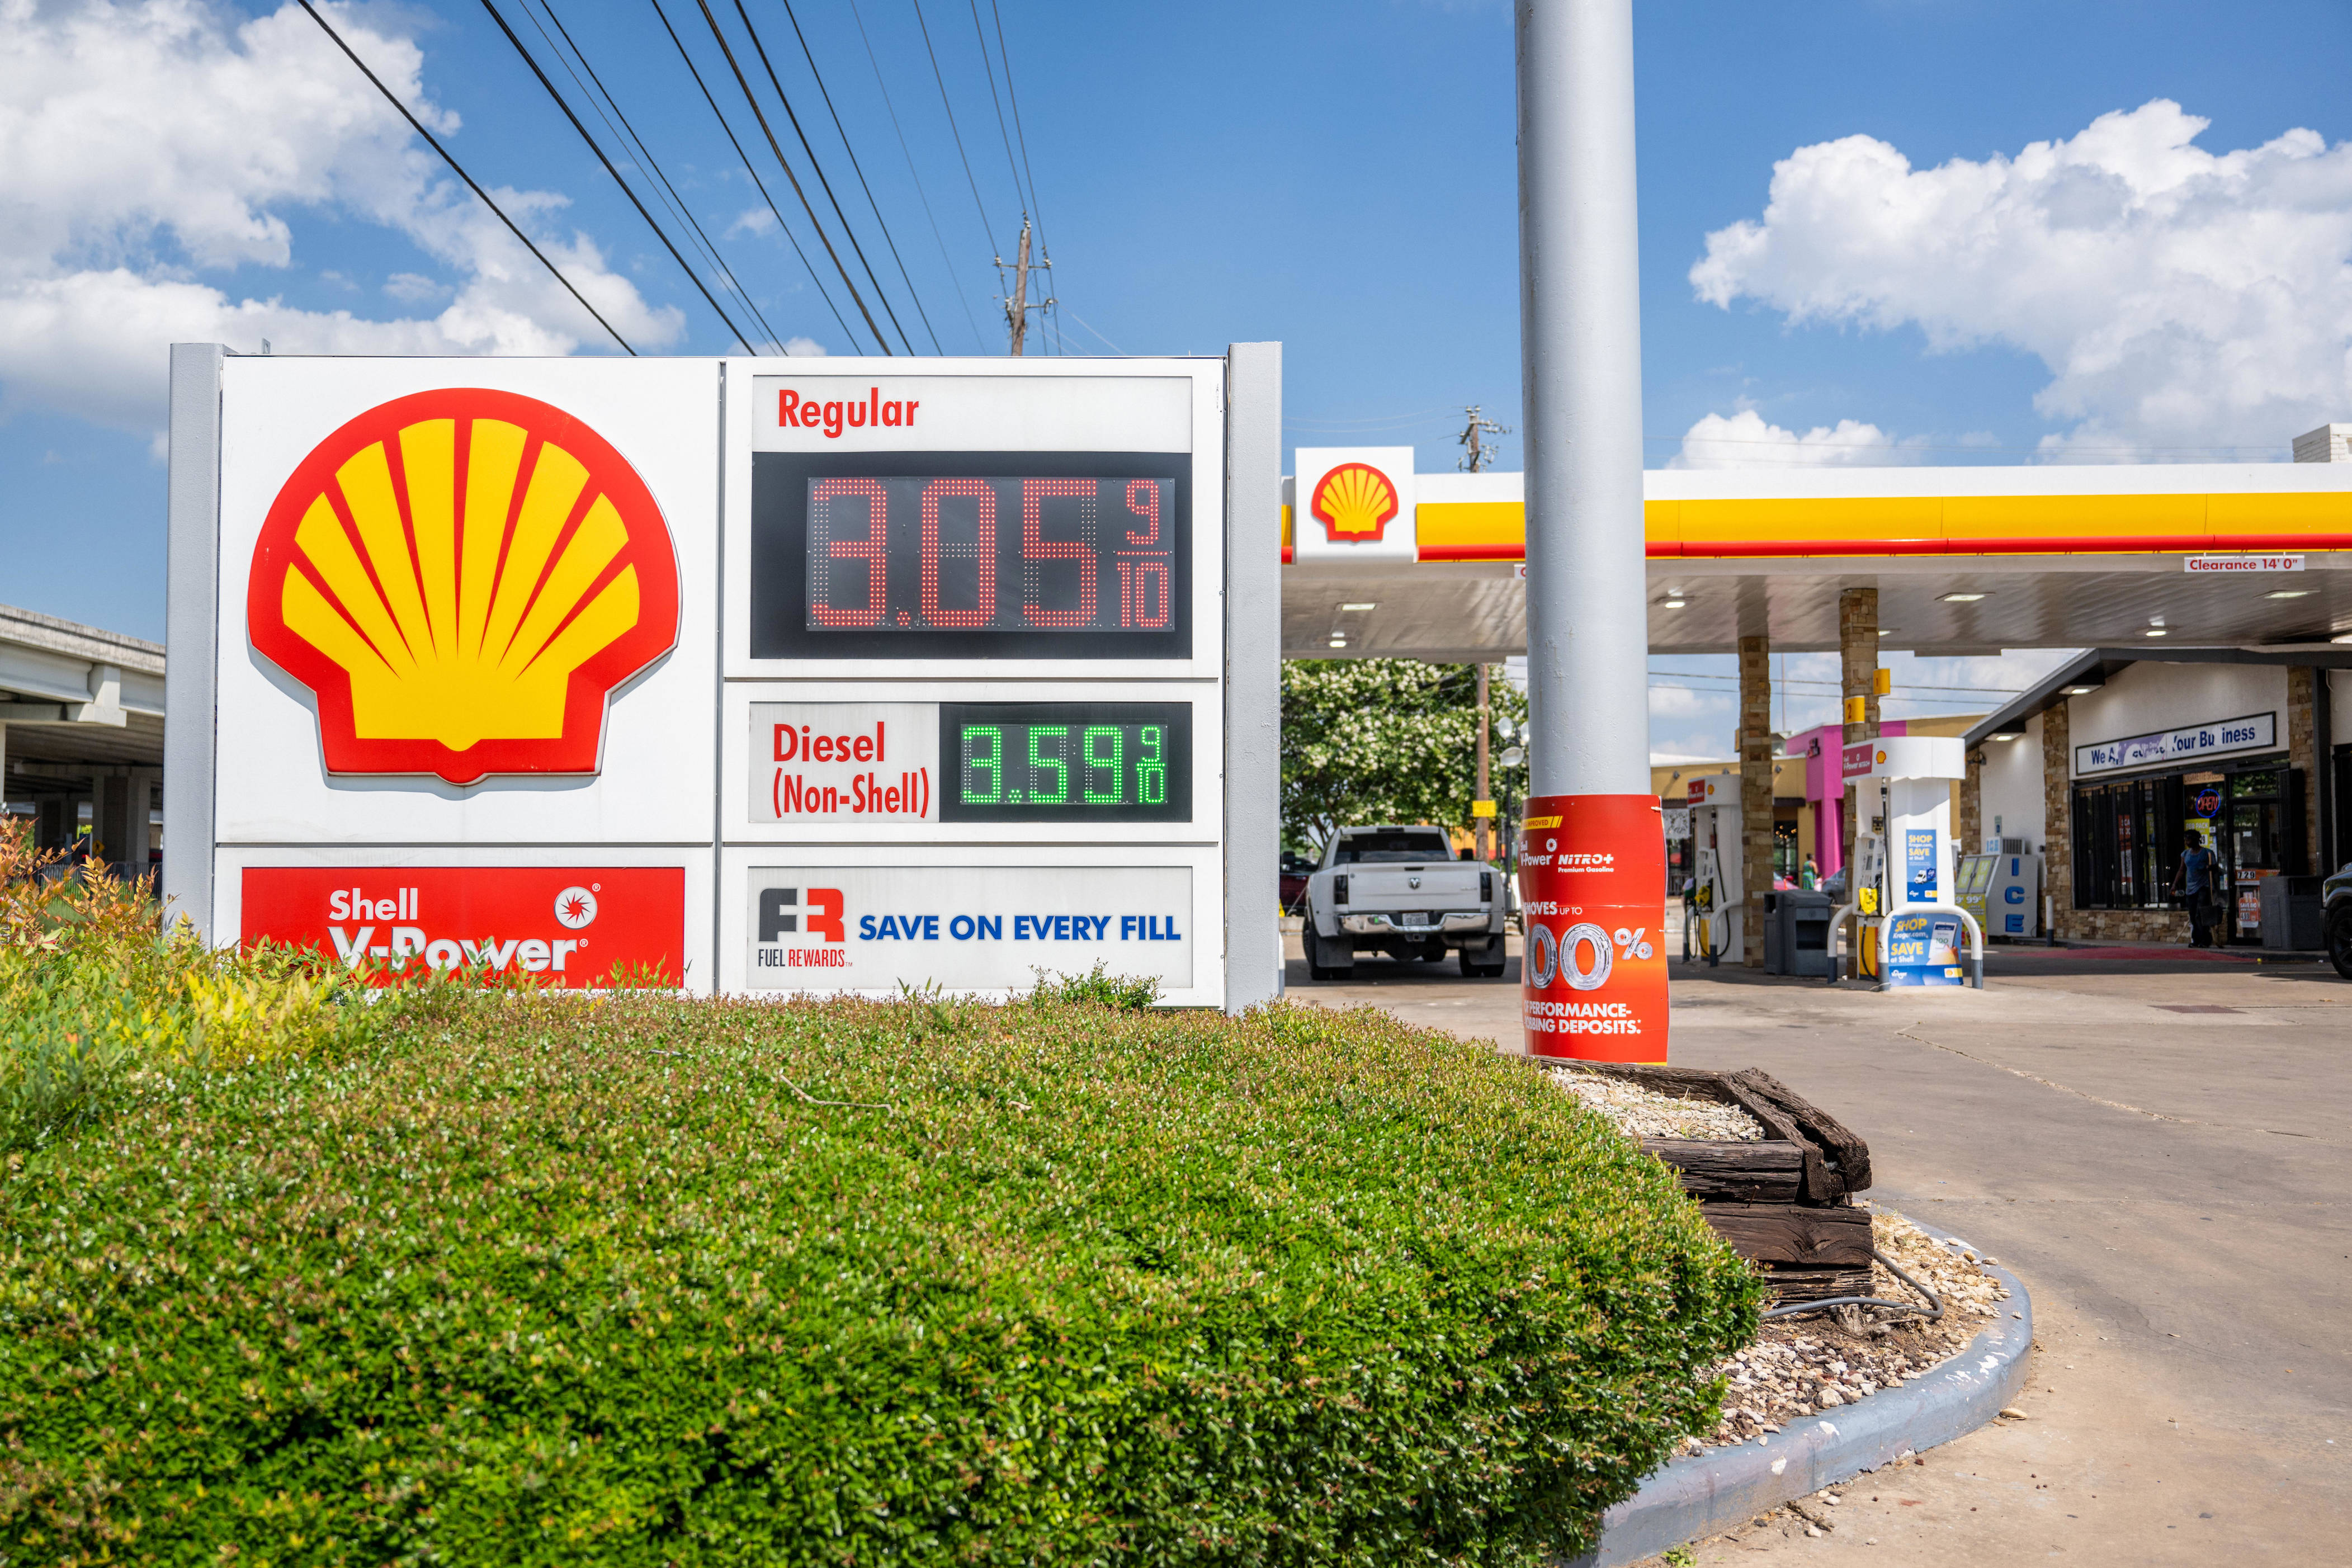 midwest region gas prices rose from last week: see how much here